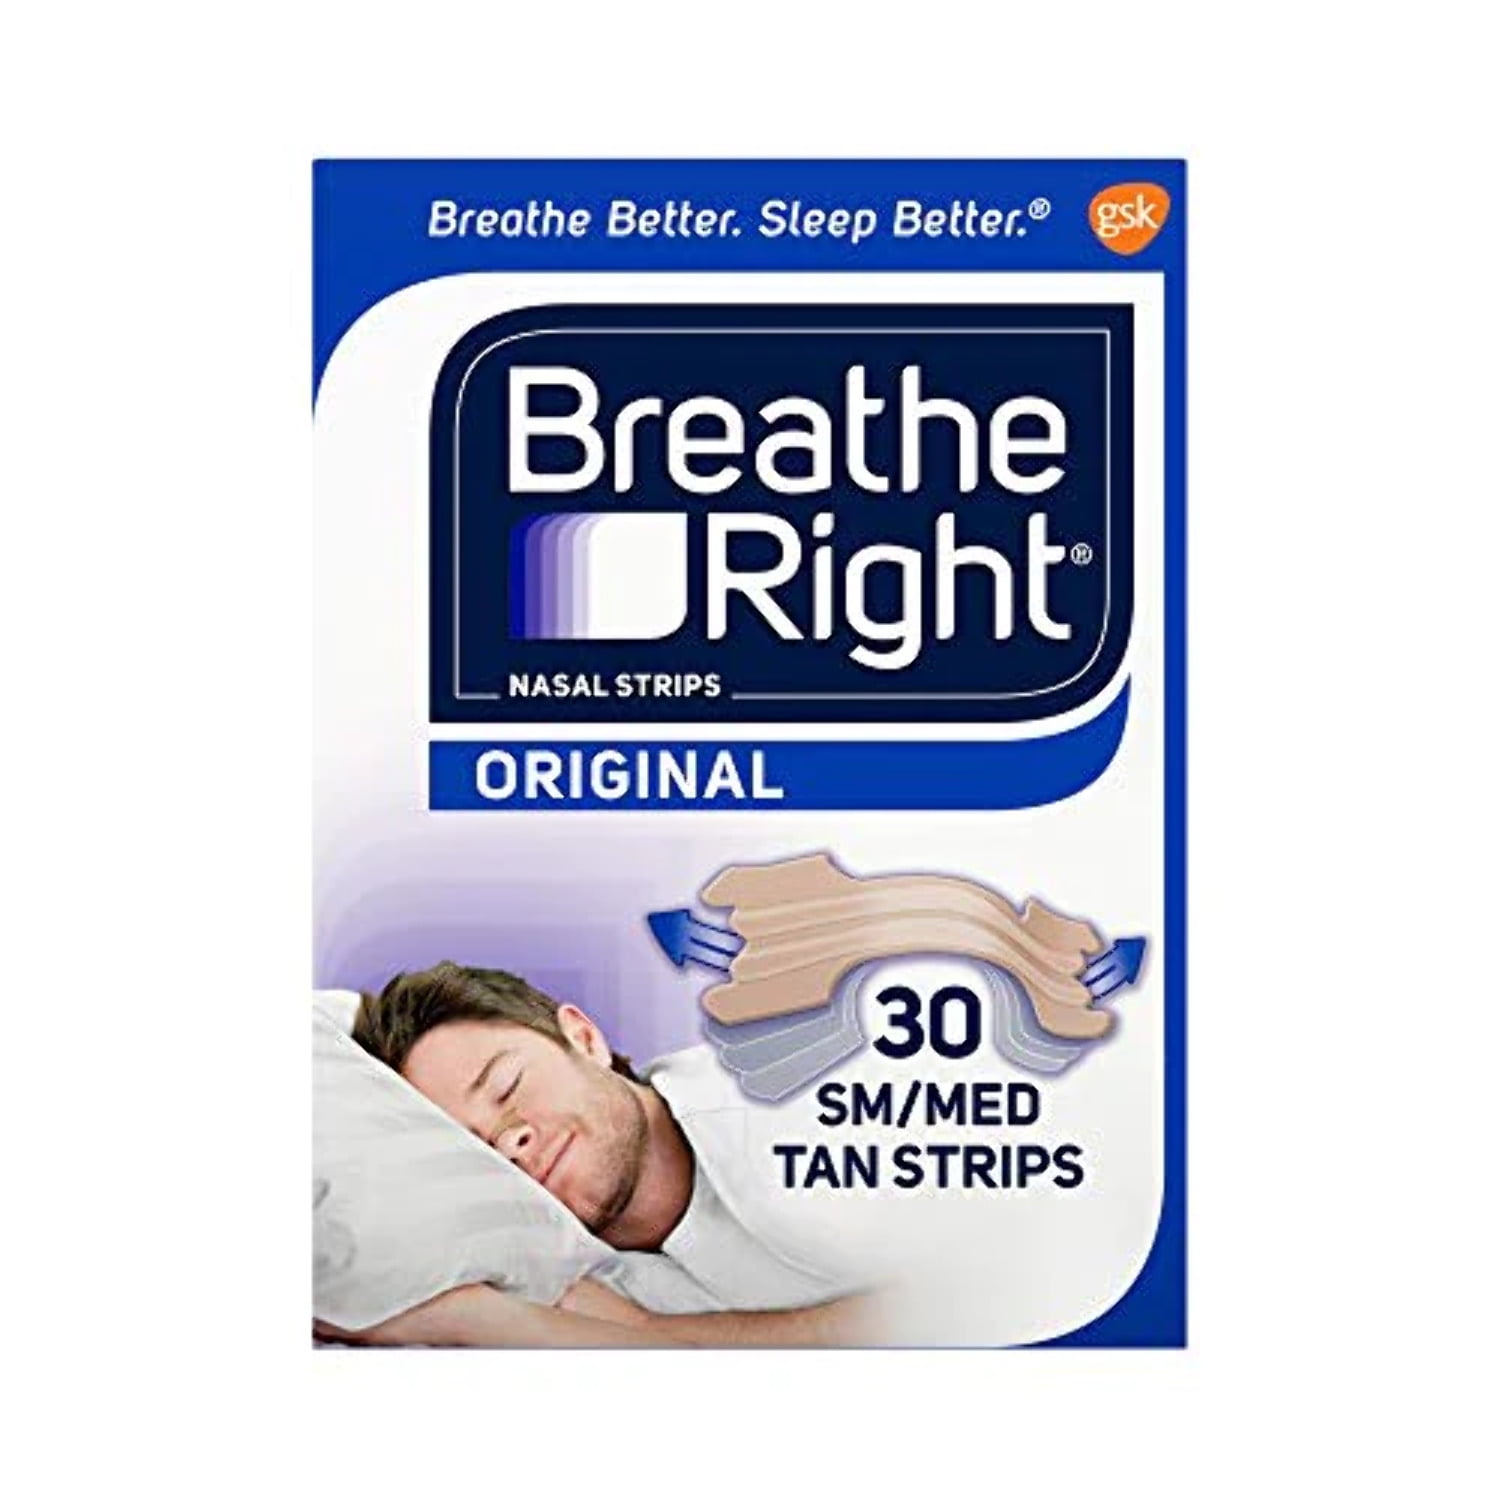 Breathe Right Original Nasal Strips, Tan Nasal Strips, Sm/Med, Help Stop  Snoring, Drug-Free Snoring Solution & Instant Nasal Congestion Relief  Caused